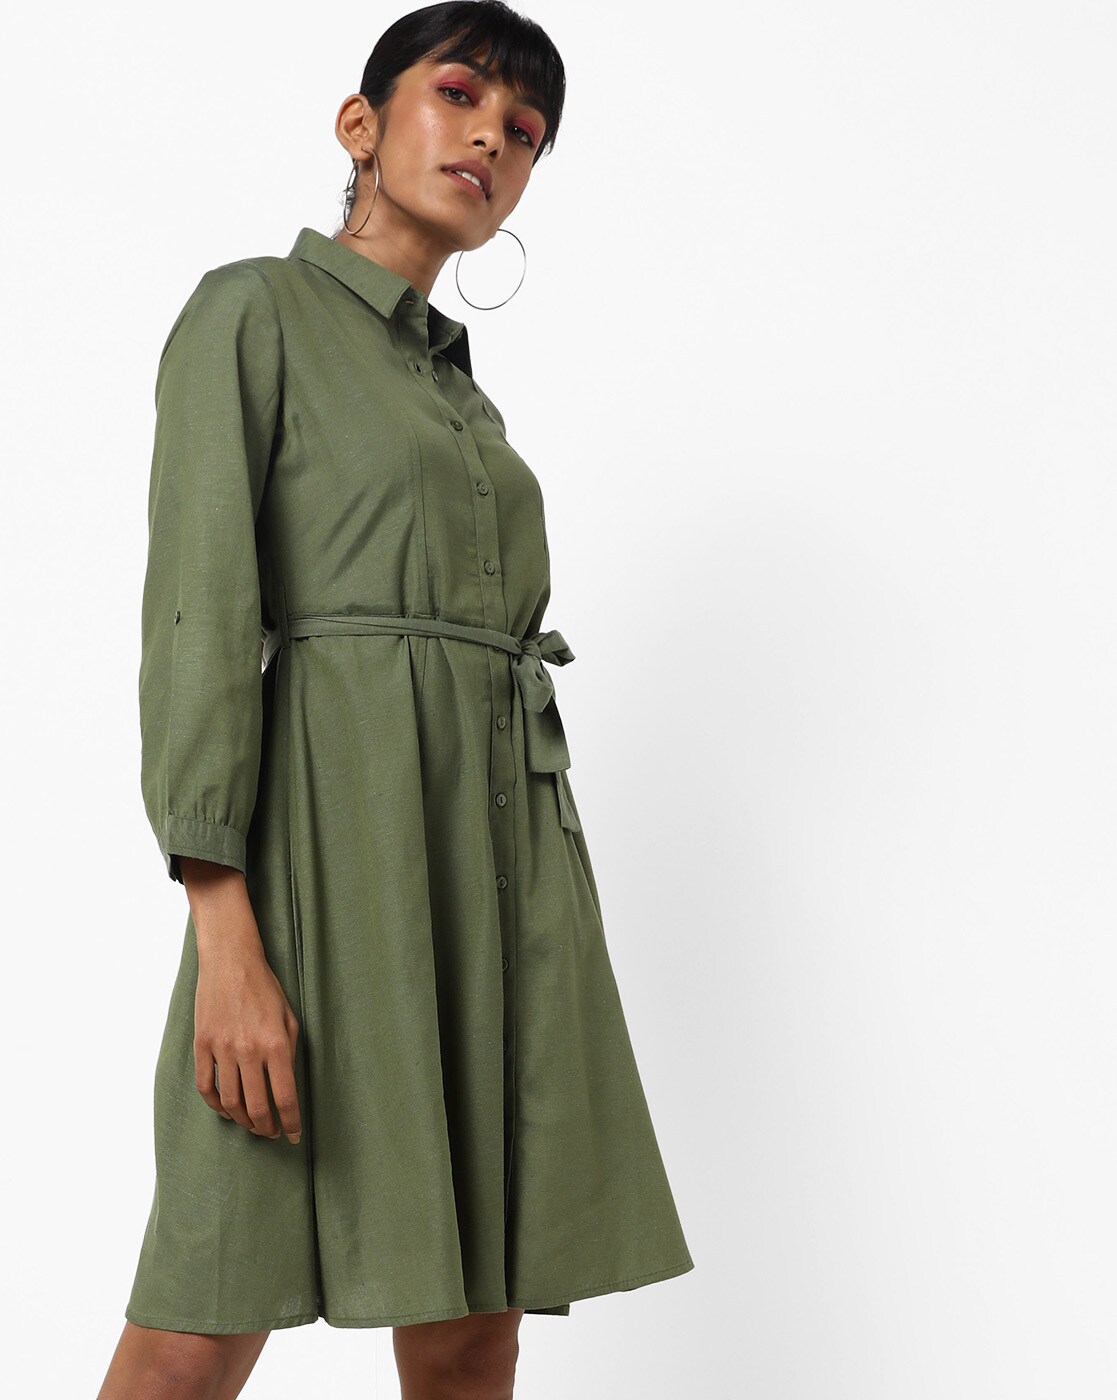 olive green frock